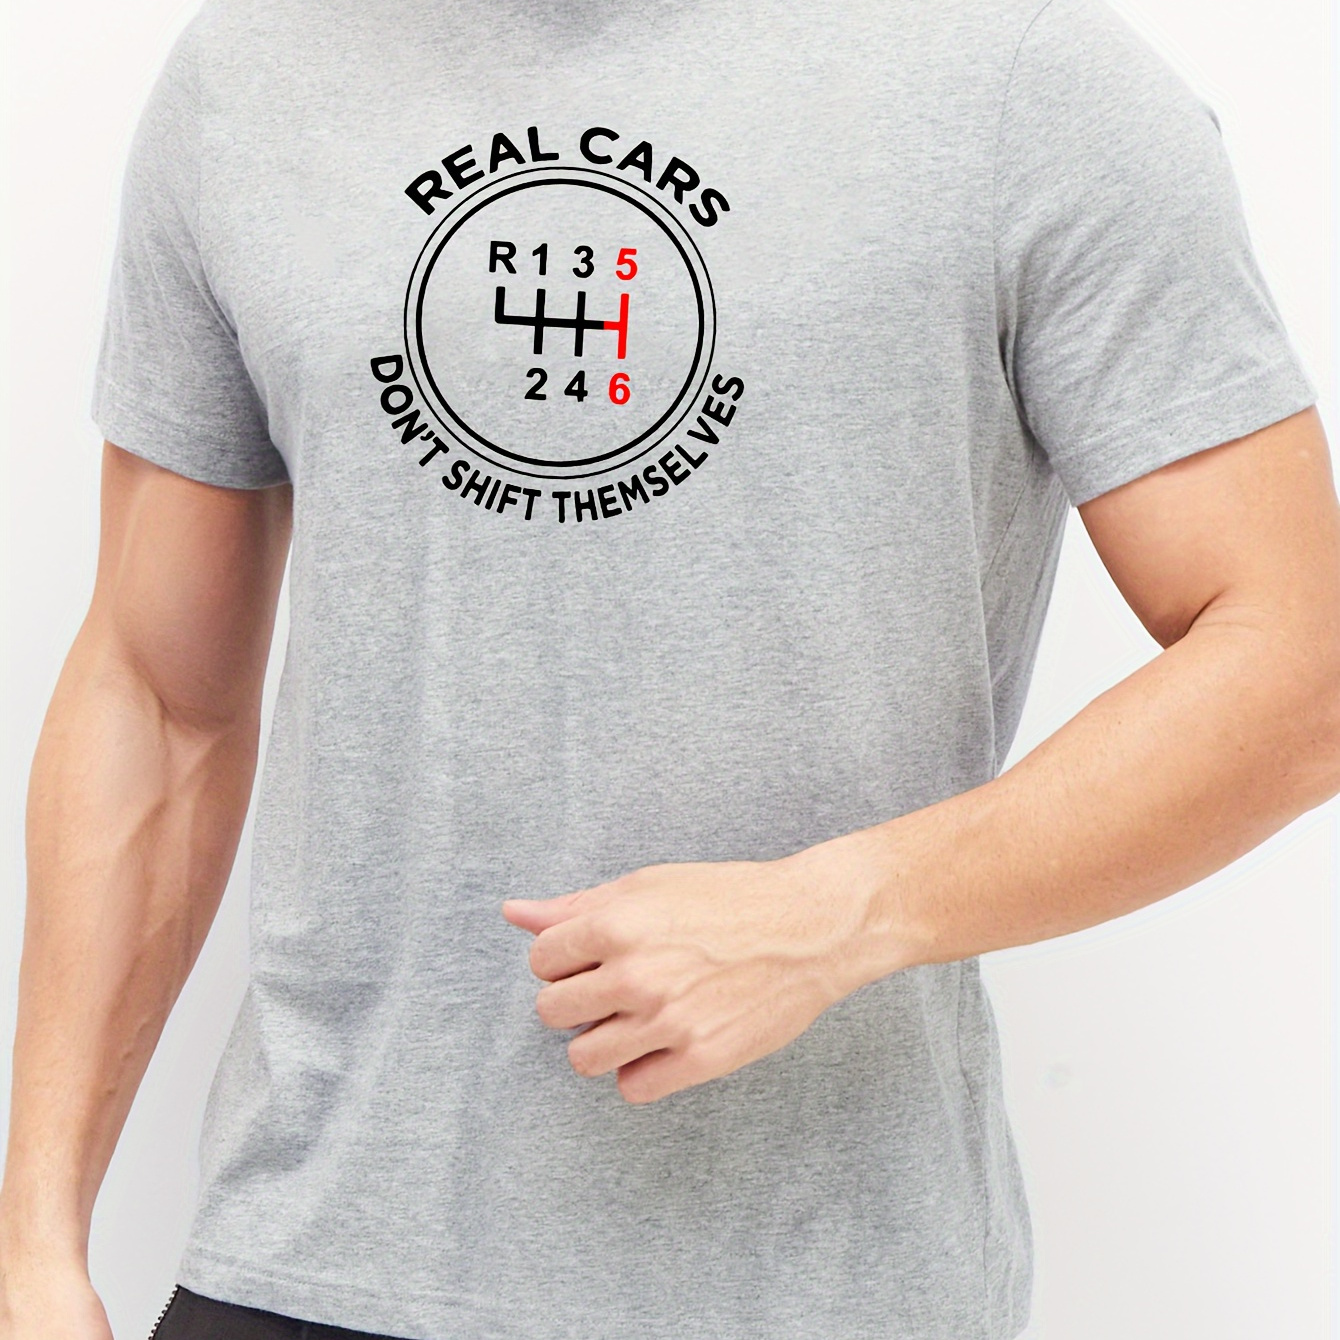 

Real Cars Print T-shirt, Stylish And Breathable Street , Simple Comfy Cotton Top, Casual Crew Neck Short Sleeve T-shirt For Summer